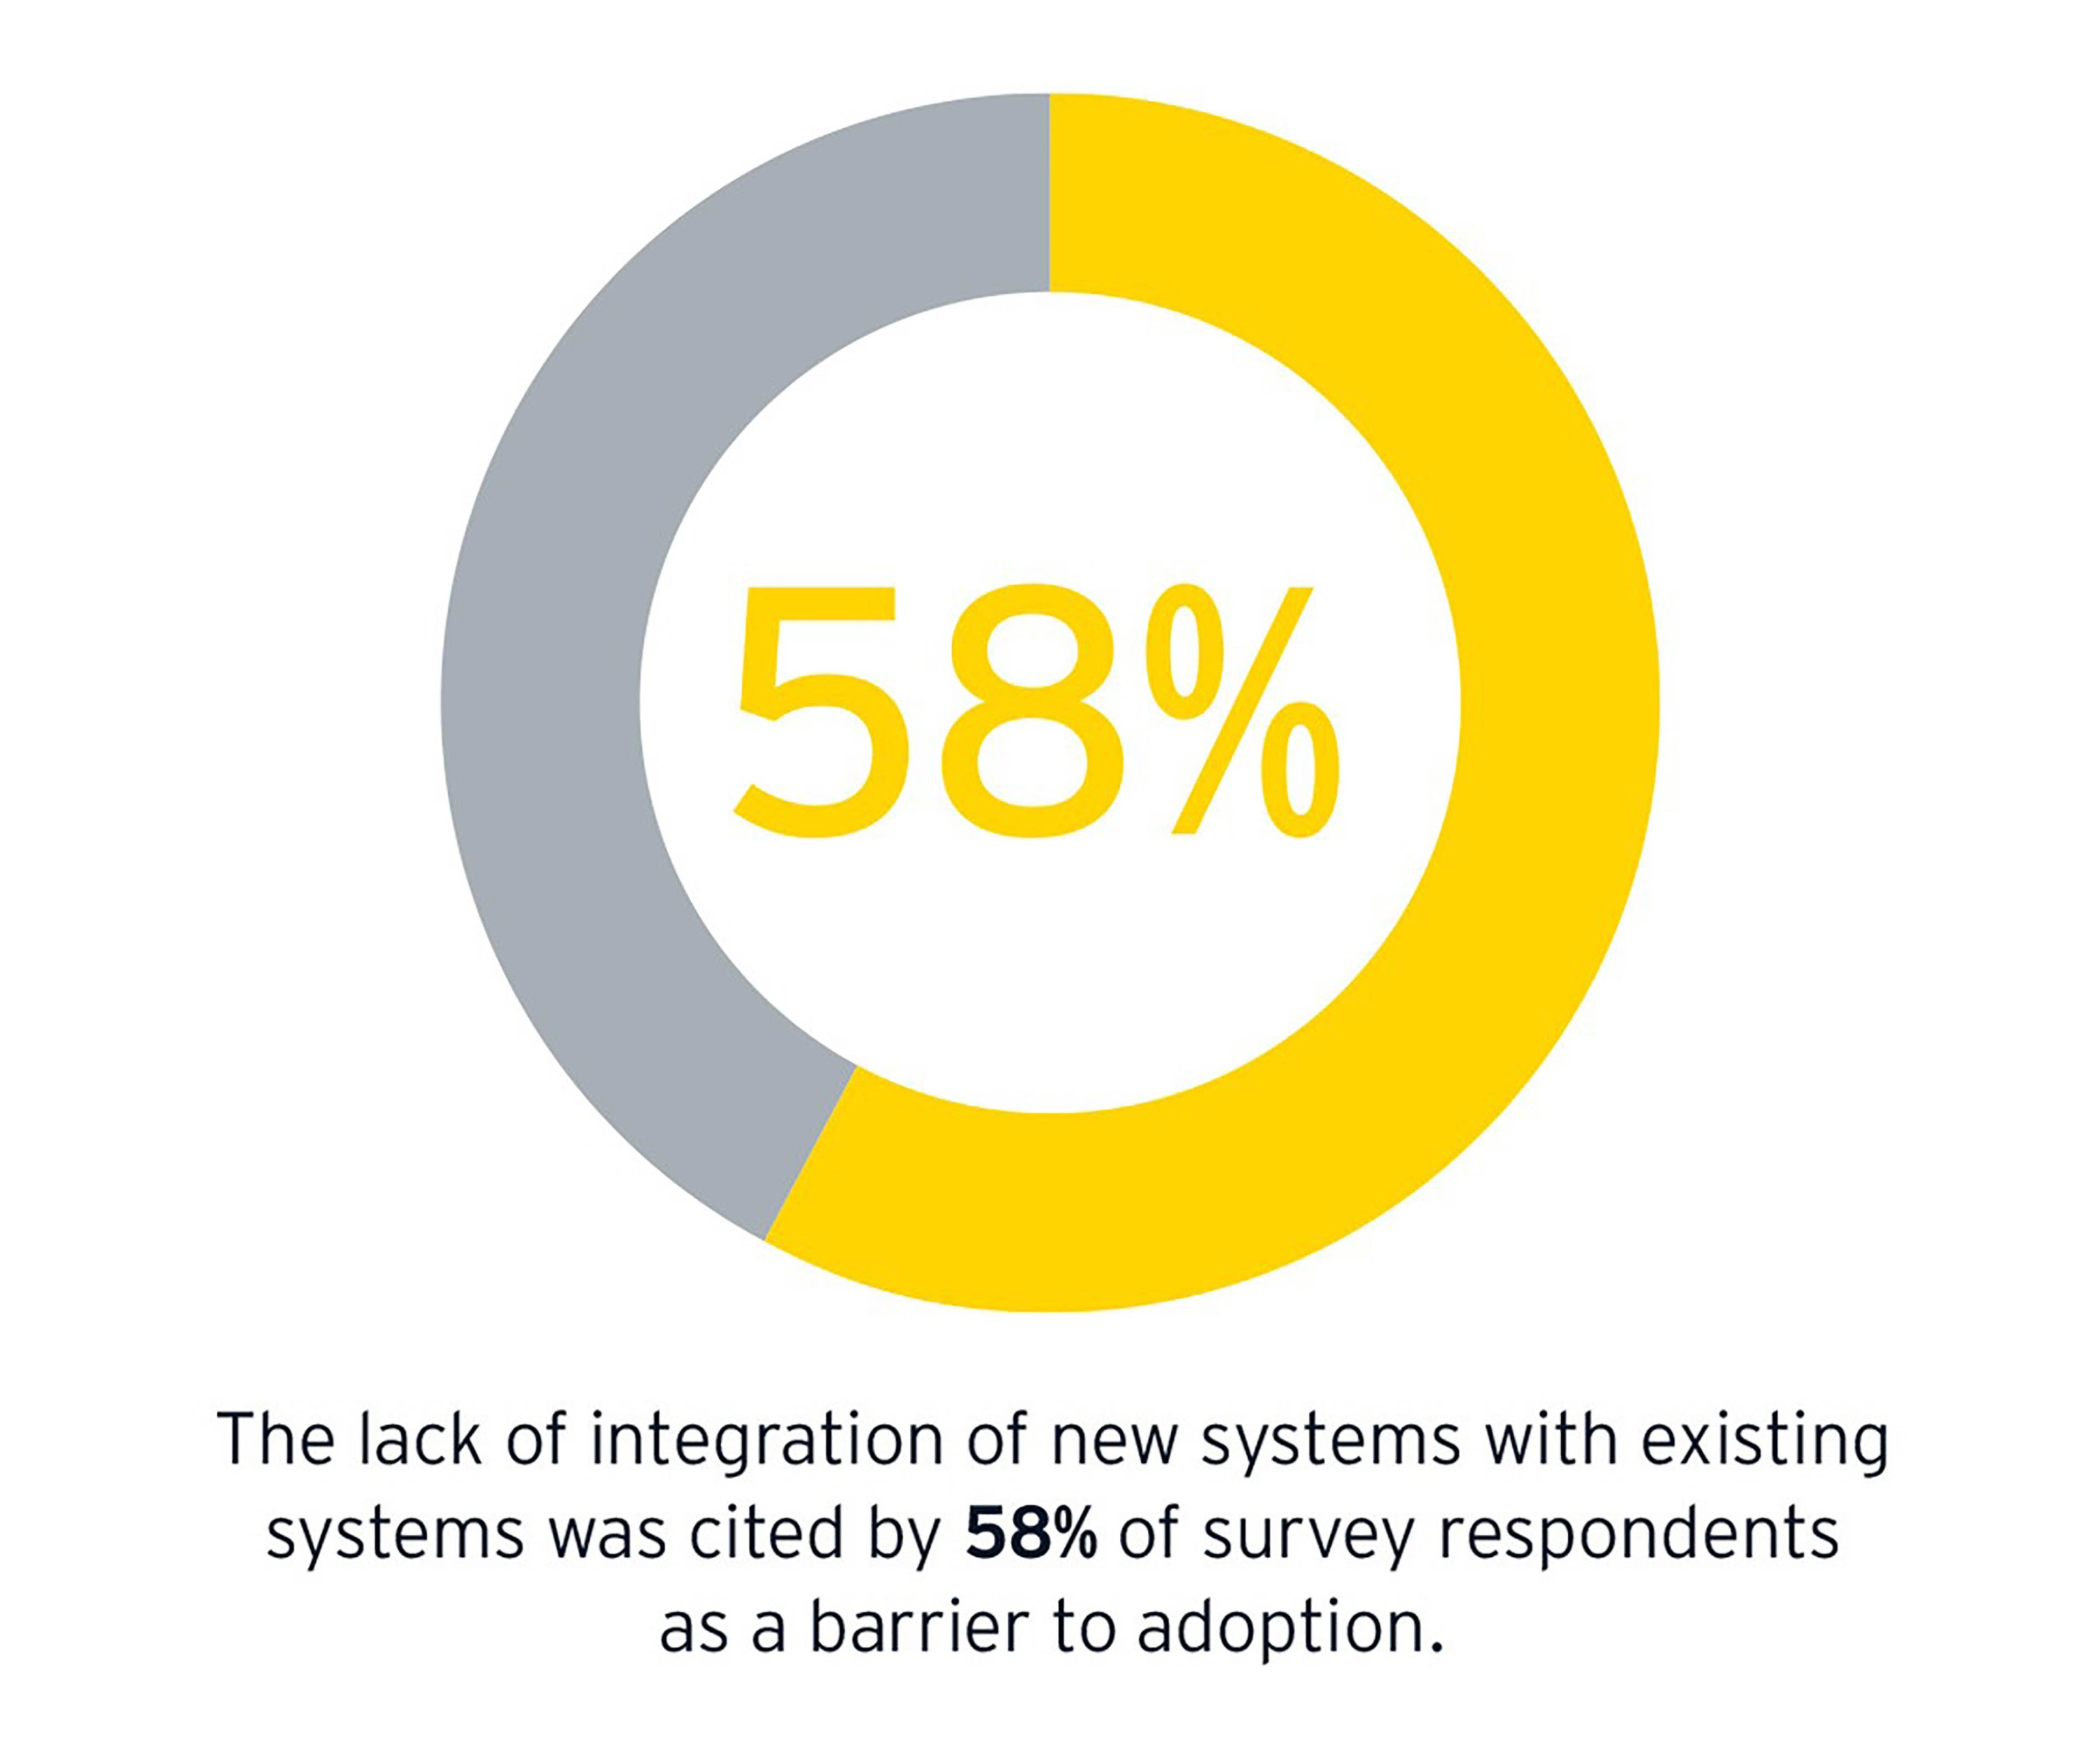 Lack of intergration of new systems with existing systems was sited by 58 percent